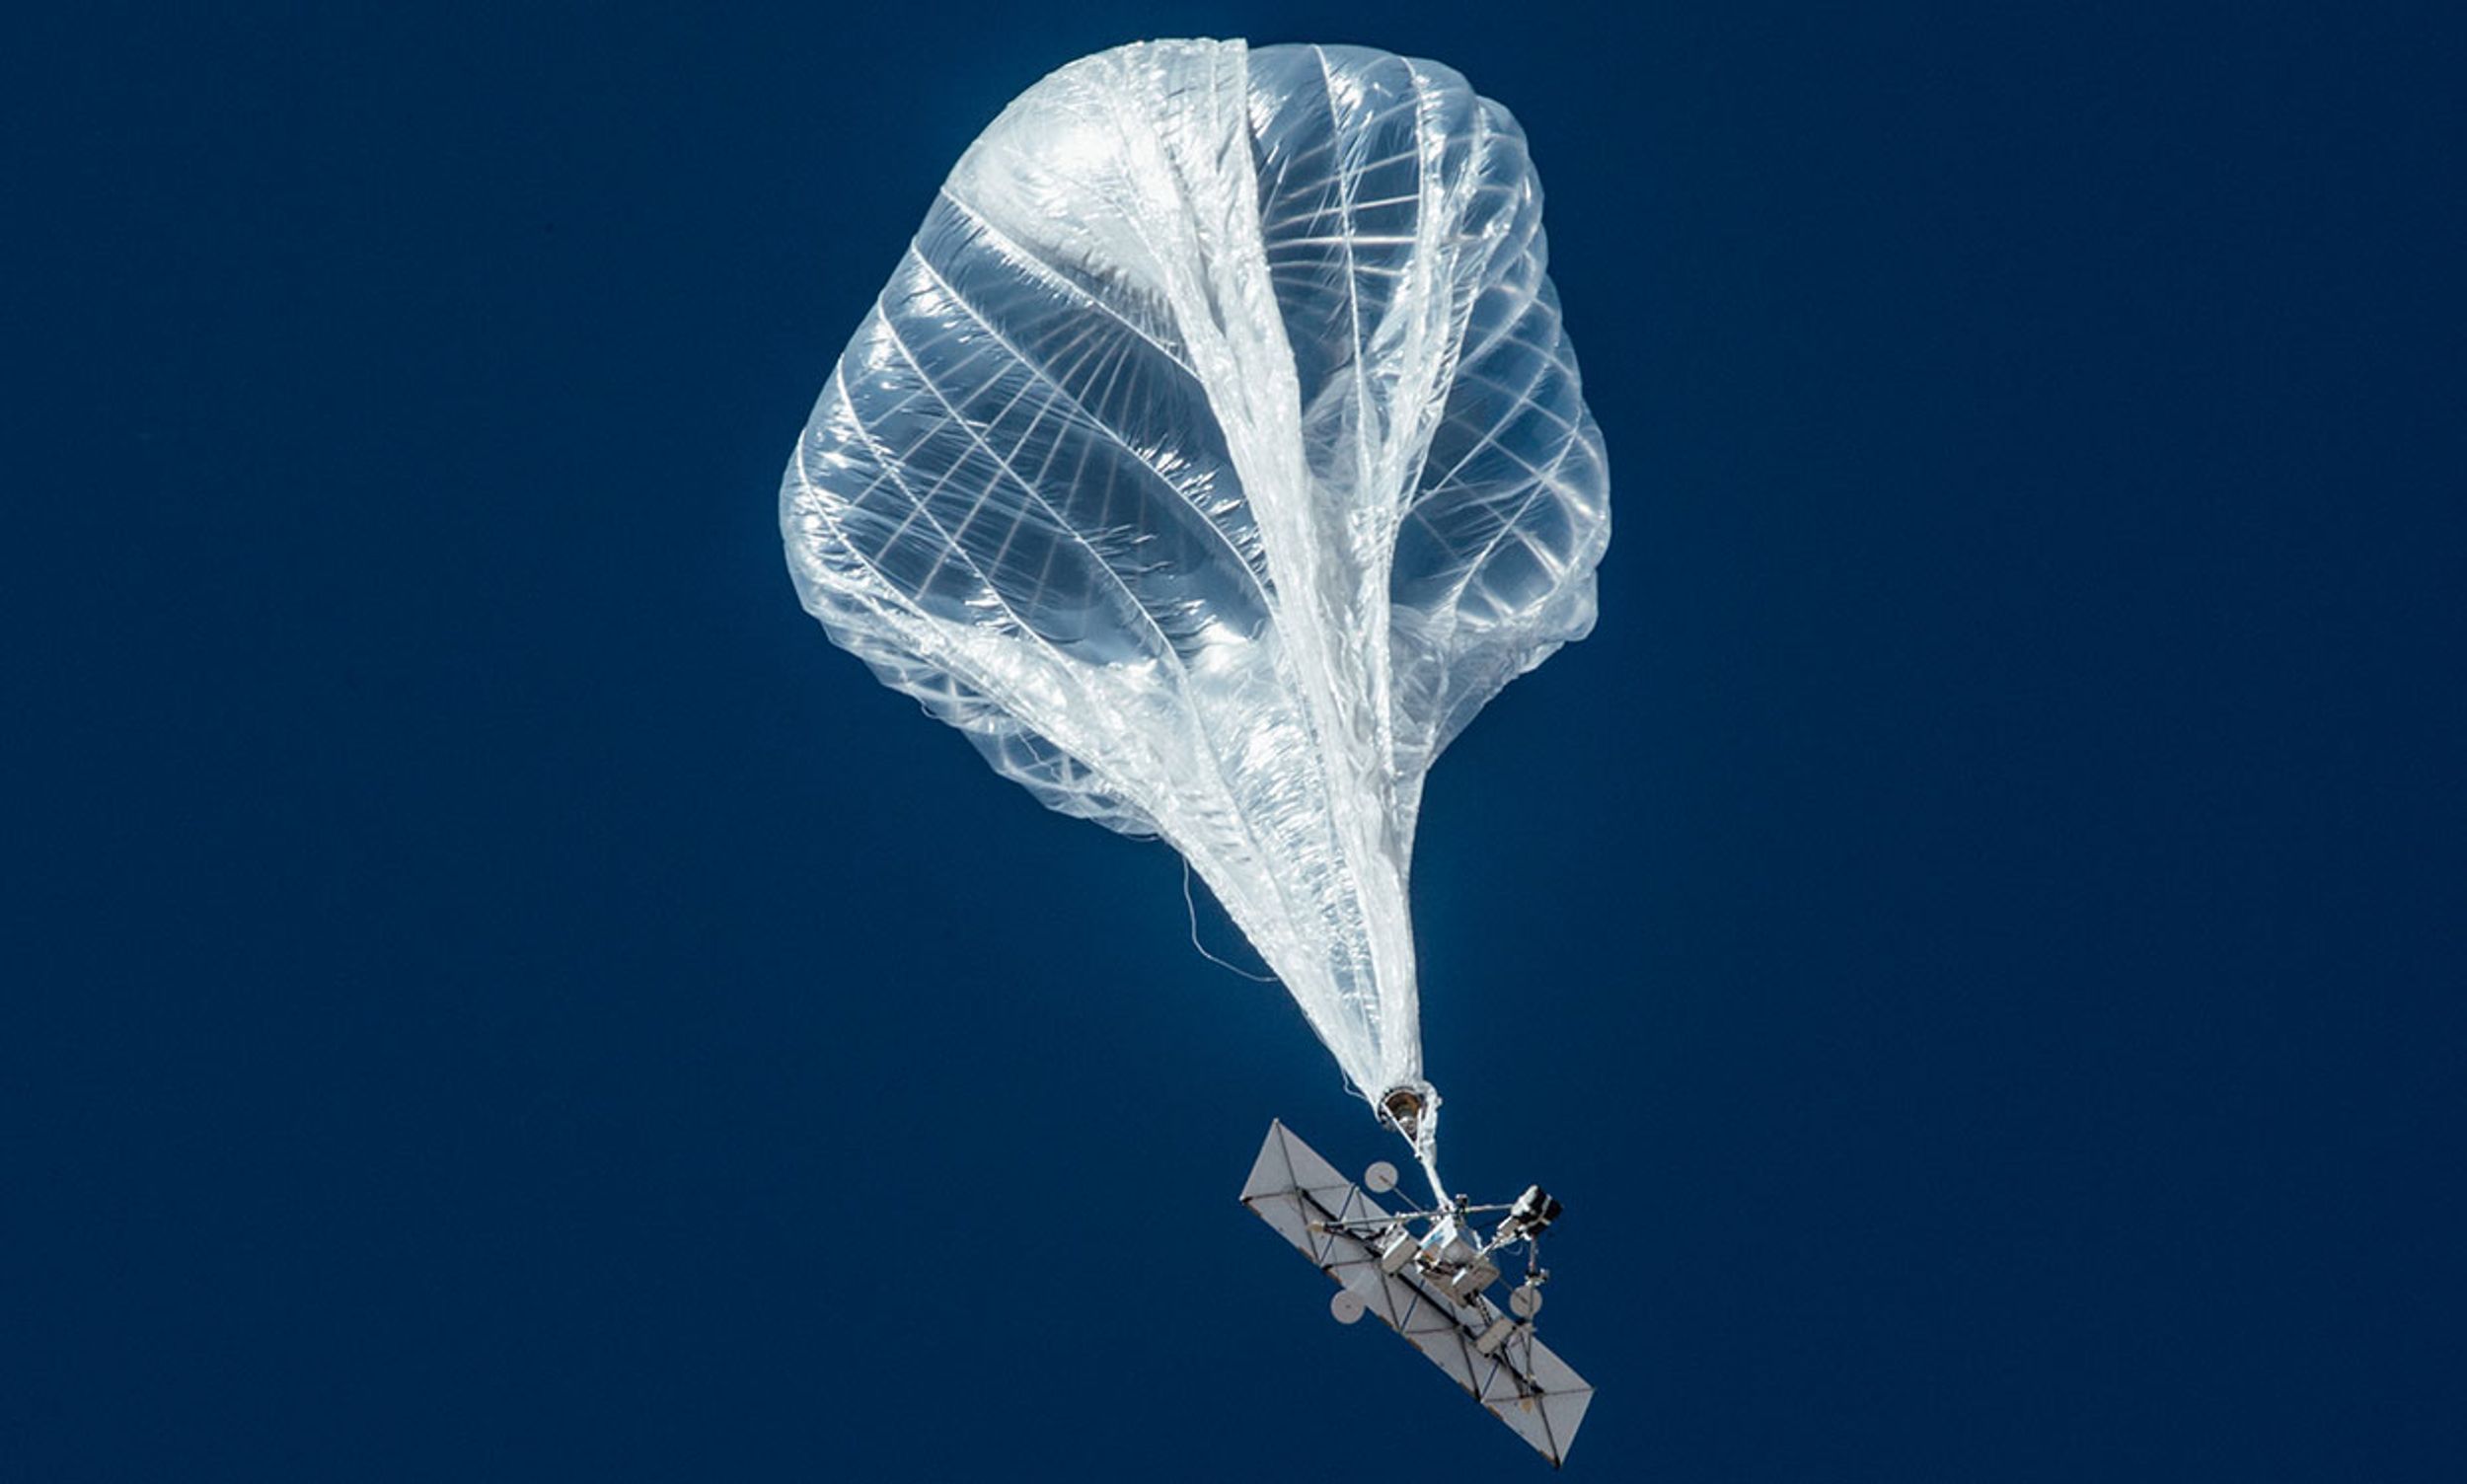 Photograph of a Loon balloon in the air.